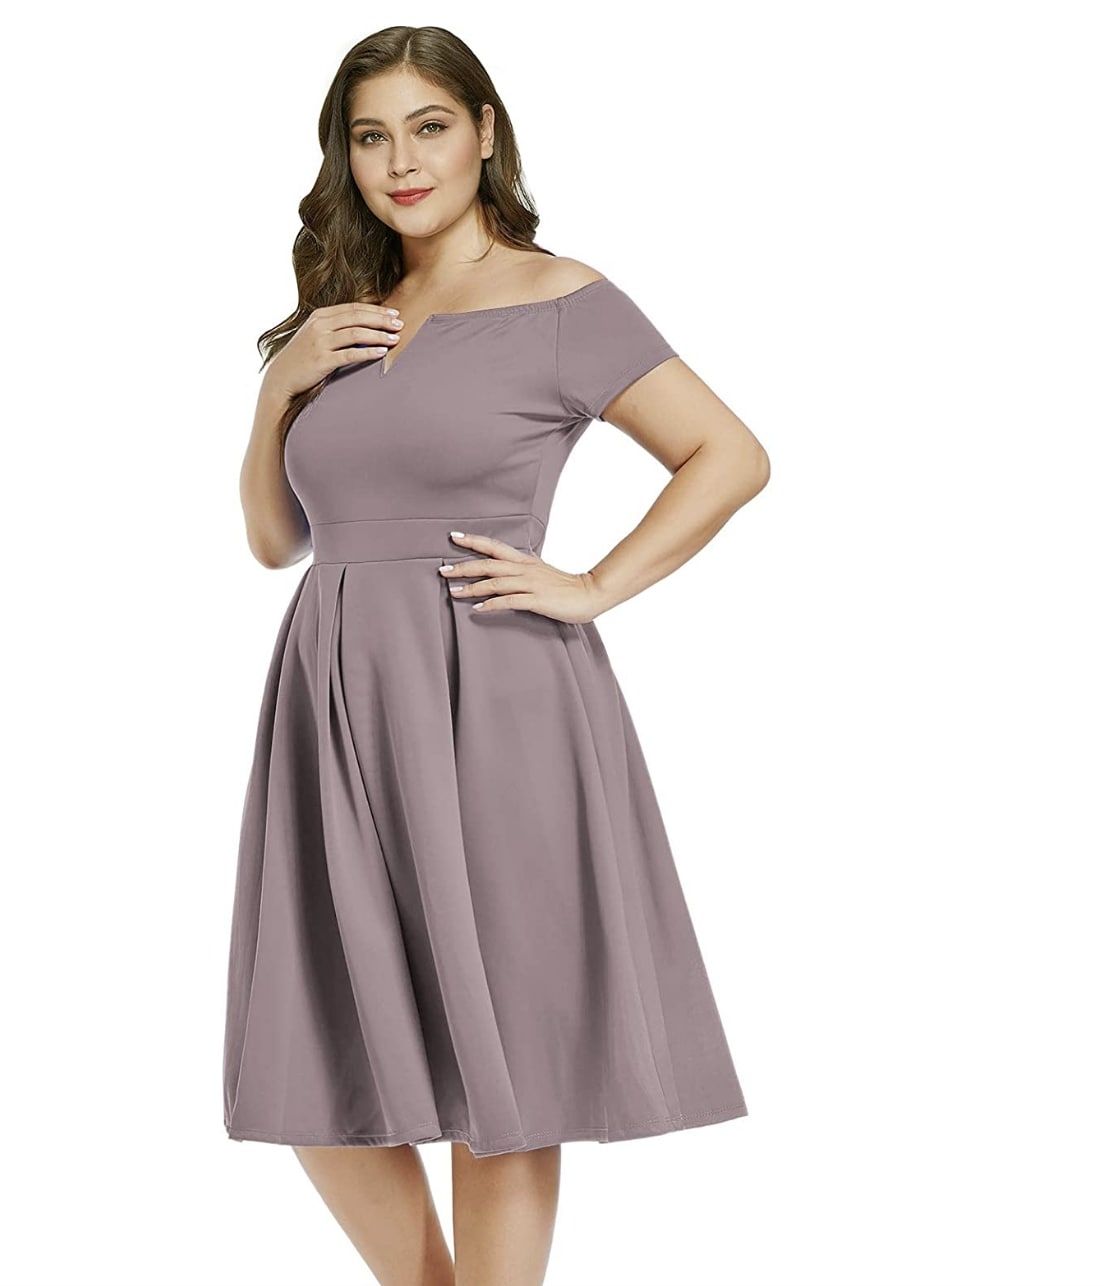 Style B07BPXV9LM Lalagen Plus Size 18 Bridesmaid Purple Cocktail Dress on Queenly